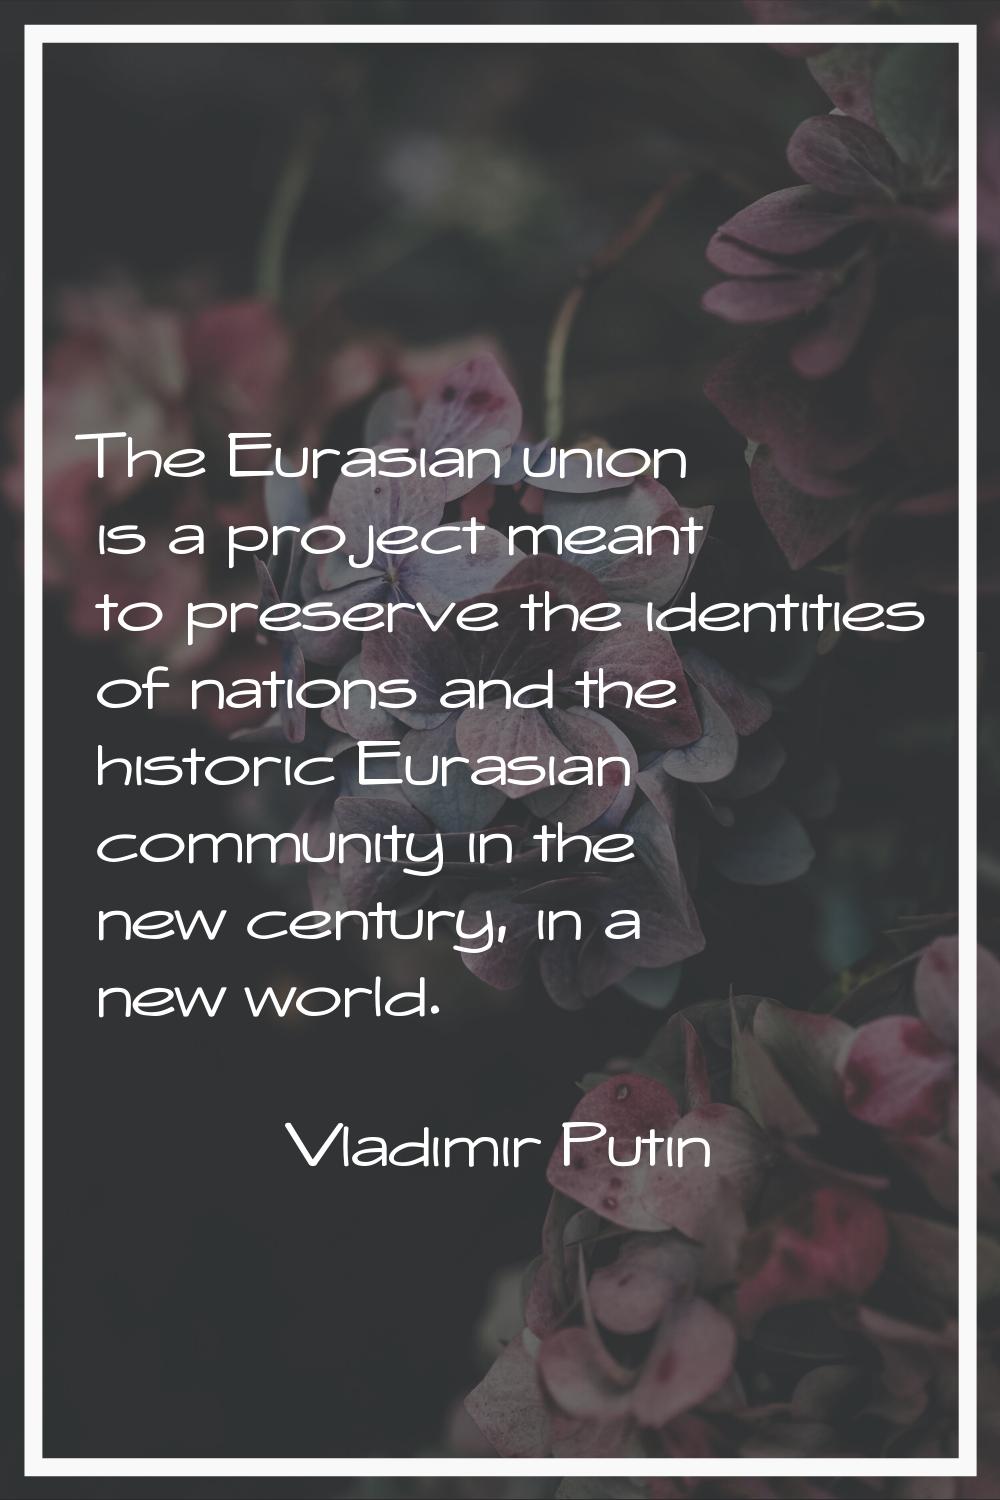 The Eurasian union is a project meant to preserve the identities of nations and the historic Eurasi